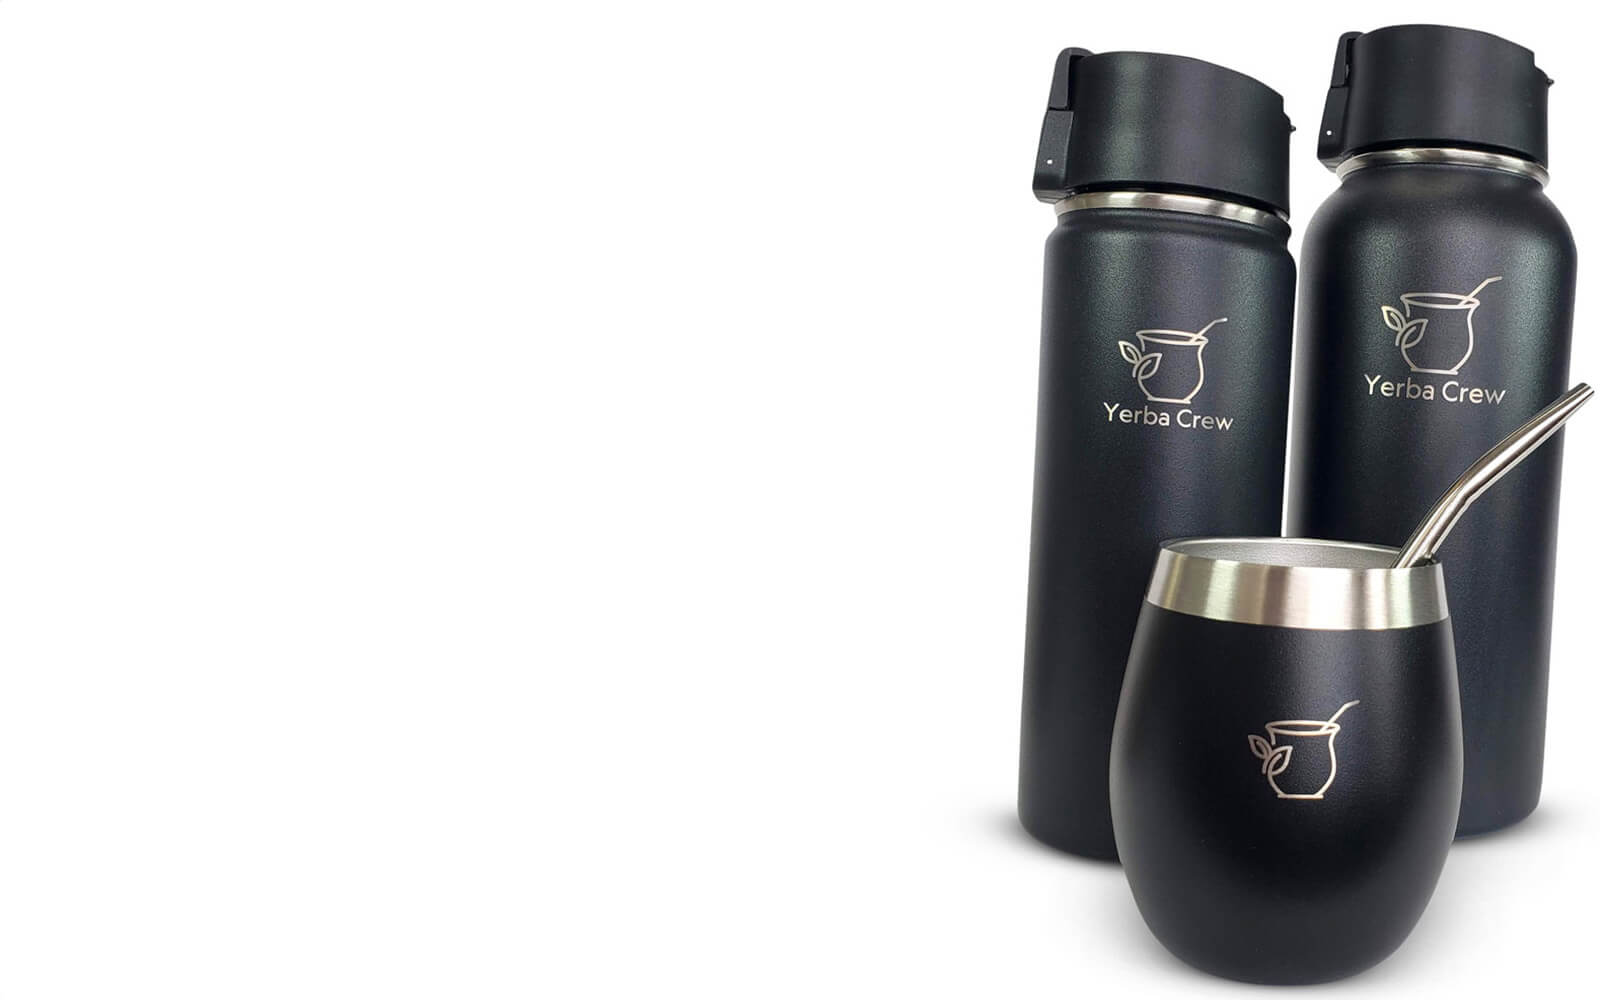 Review] Thermos Flasks - Twinderelmo